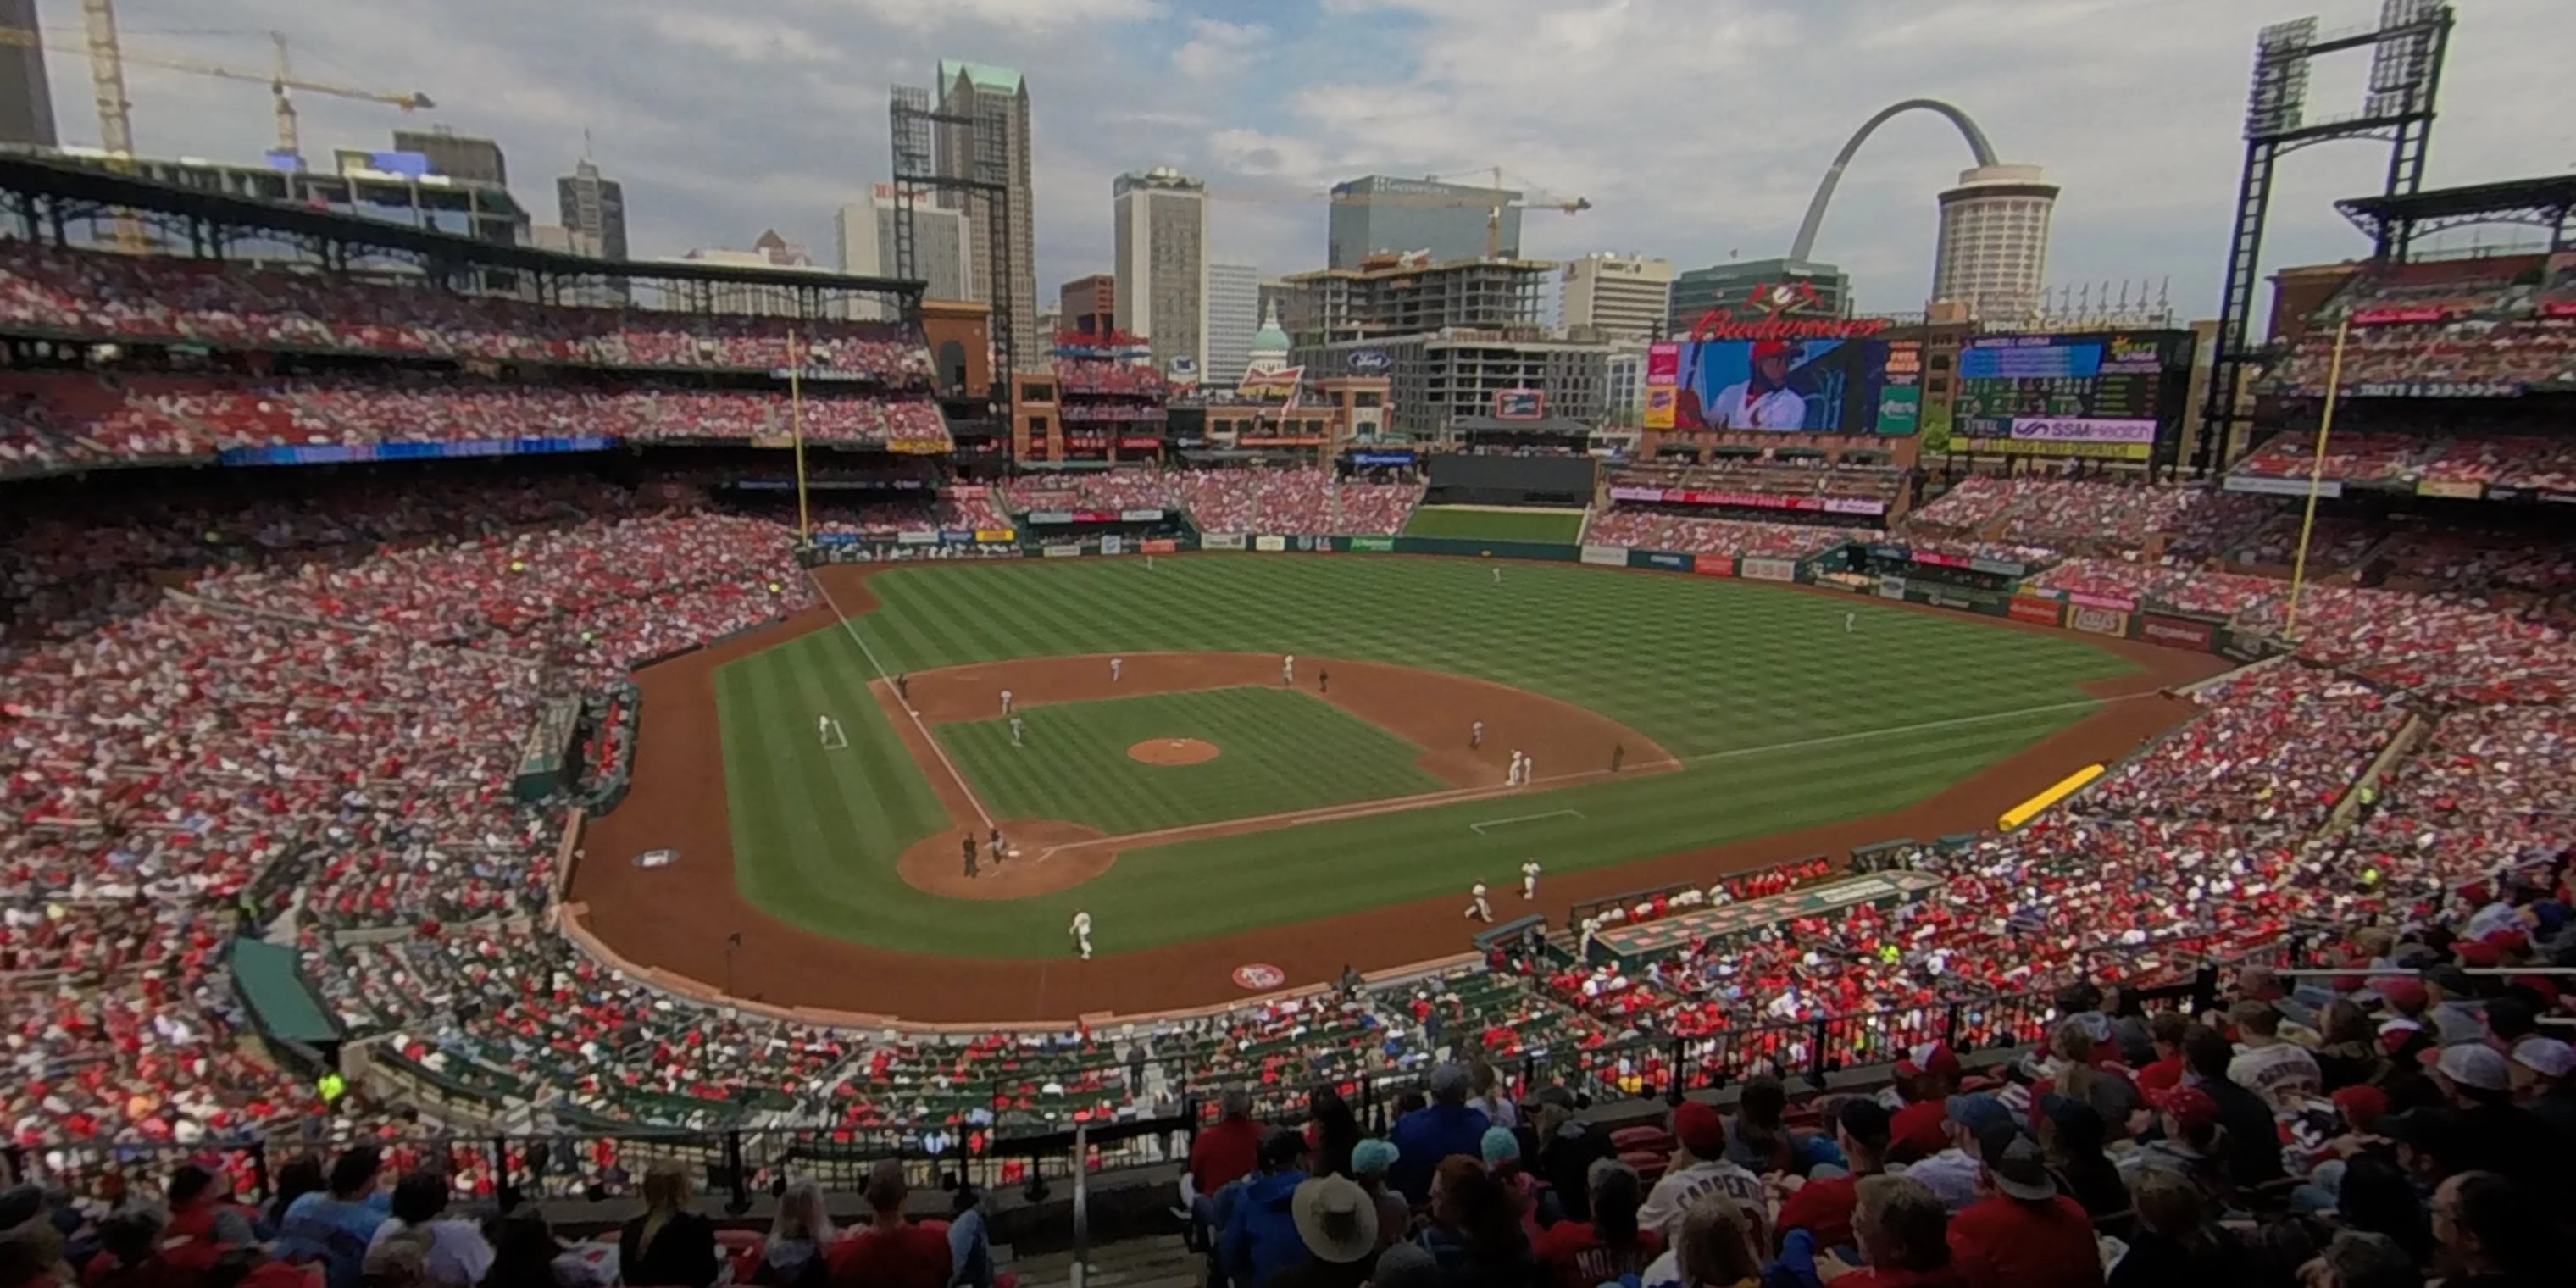 section 247 panoramic seat view  - busch stadium